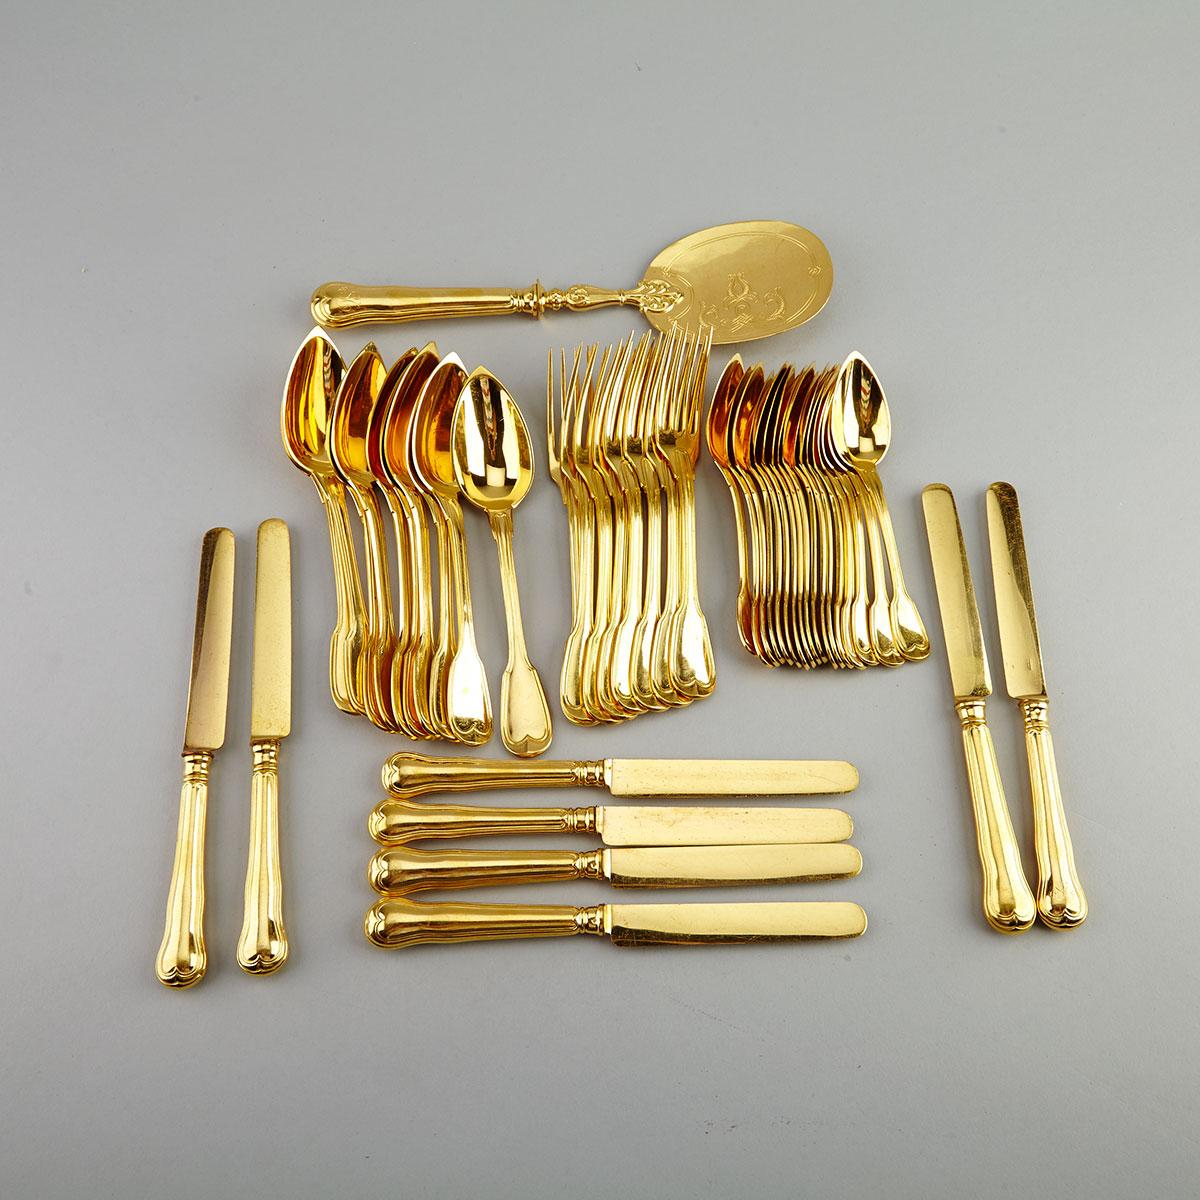 French Gold Plated Fiddle and Thread Pattern Dessert Flatware Service, Christofle, early 20th century